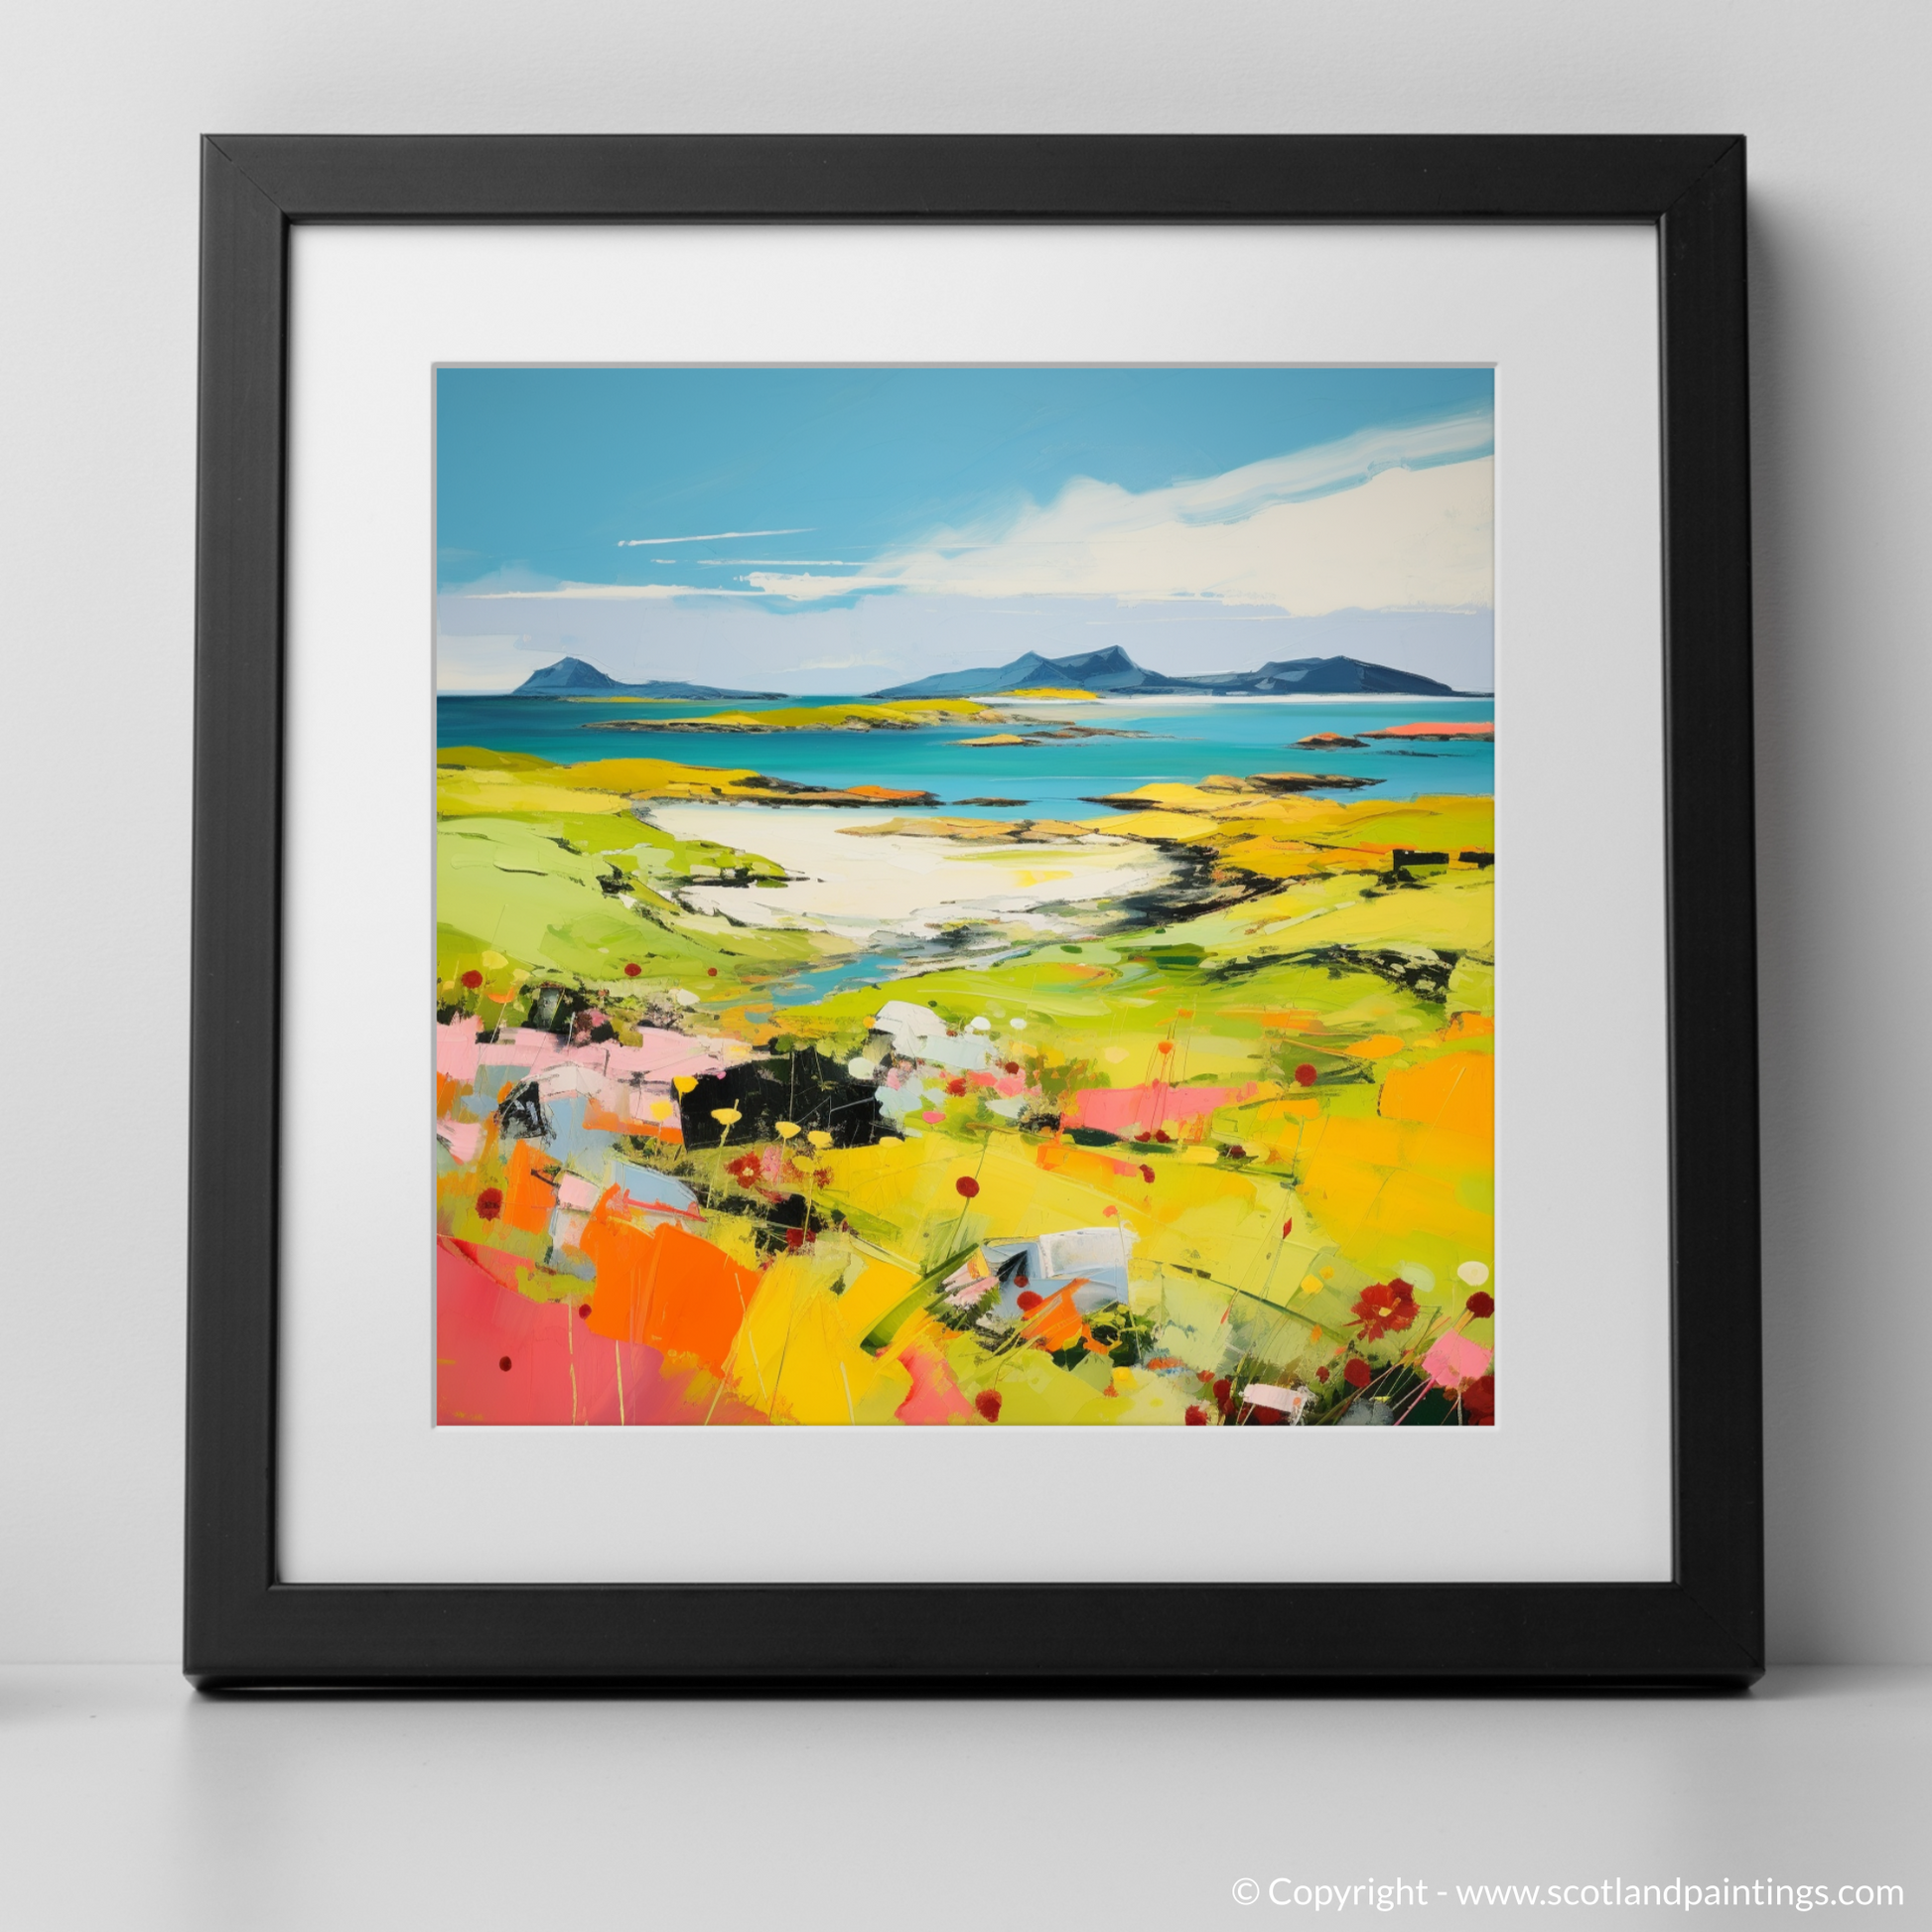 Art Print of Isle of Colonsay, Inner Hebrides in summer with a black frame